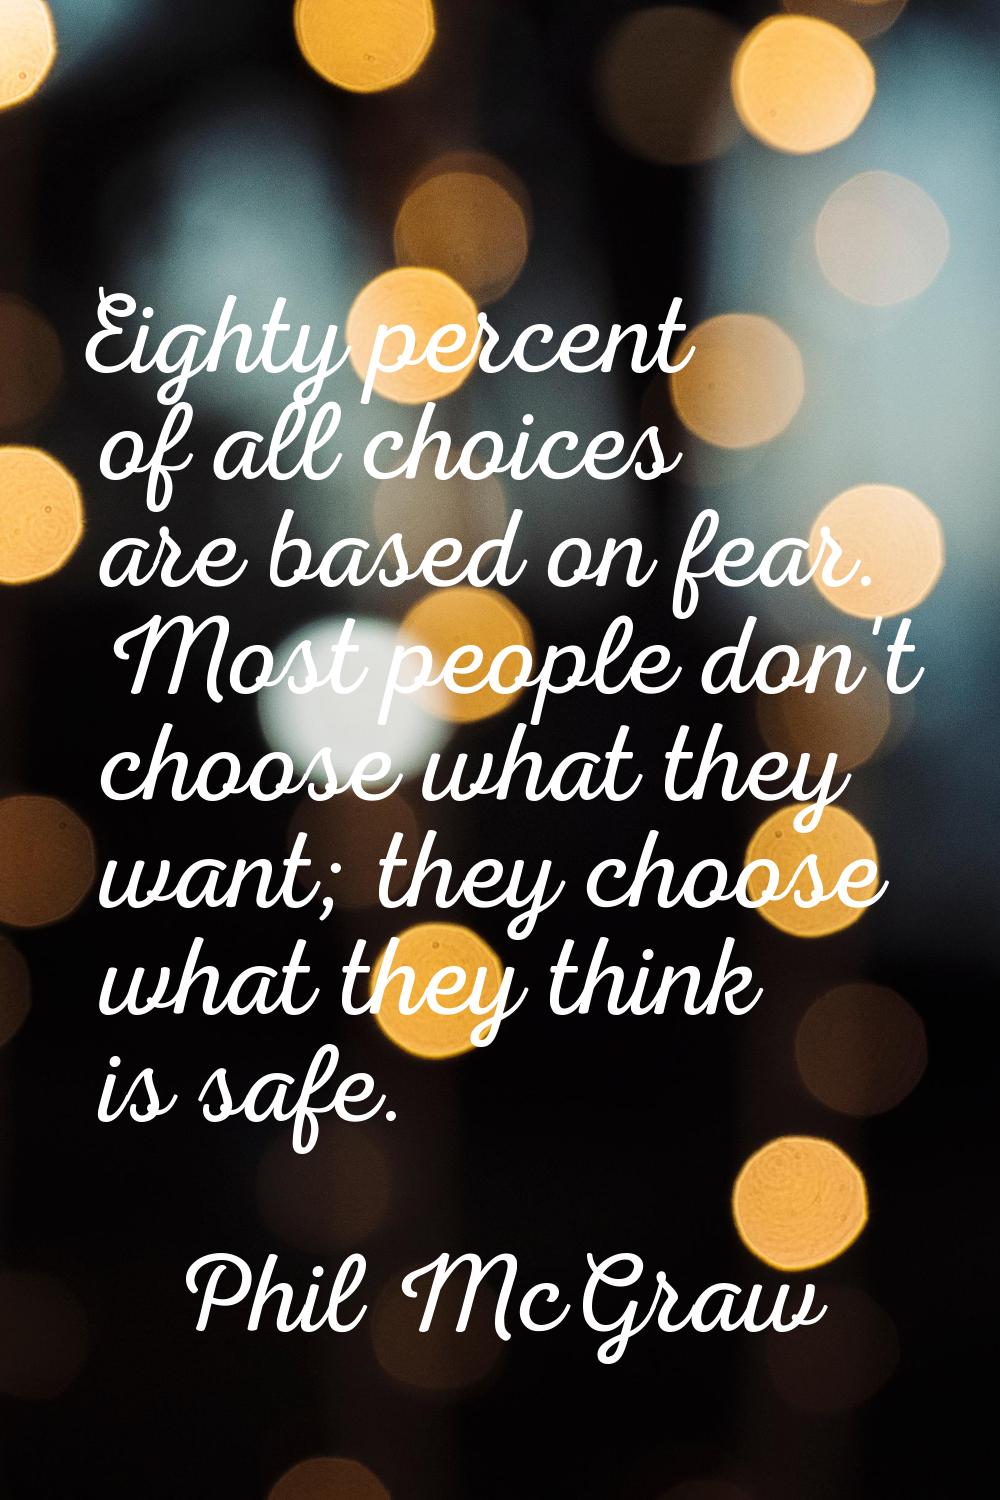 Eighty percent of all choices are based on fear. Most people don't choose what they want; they choo